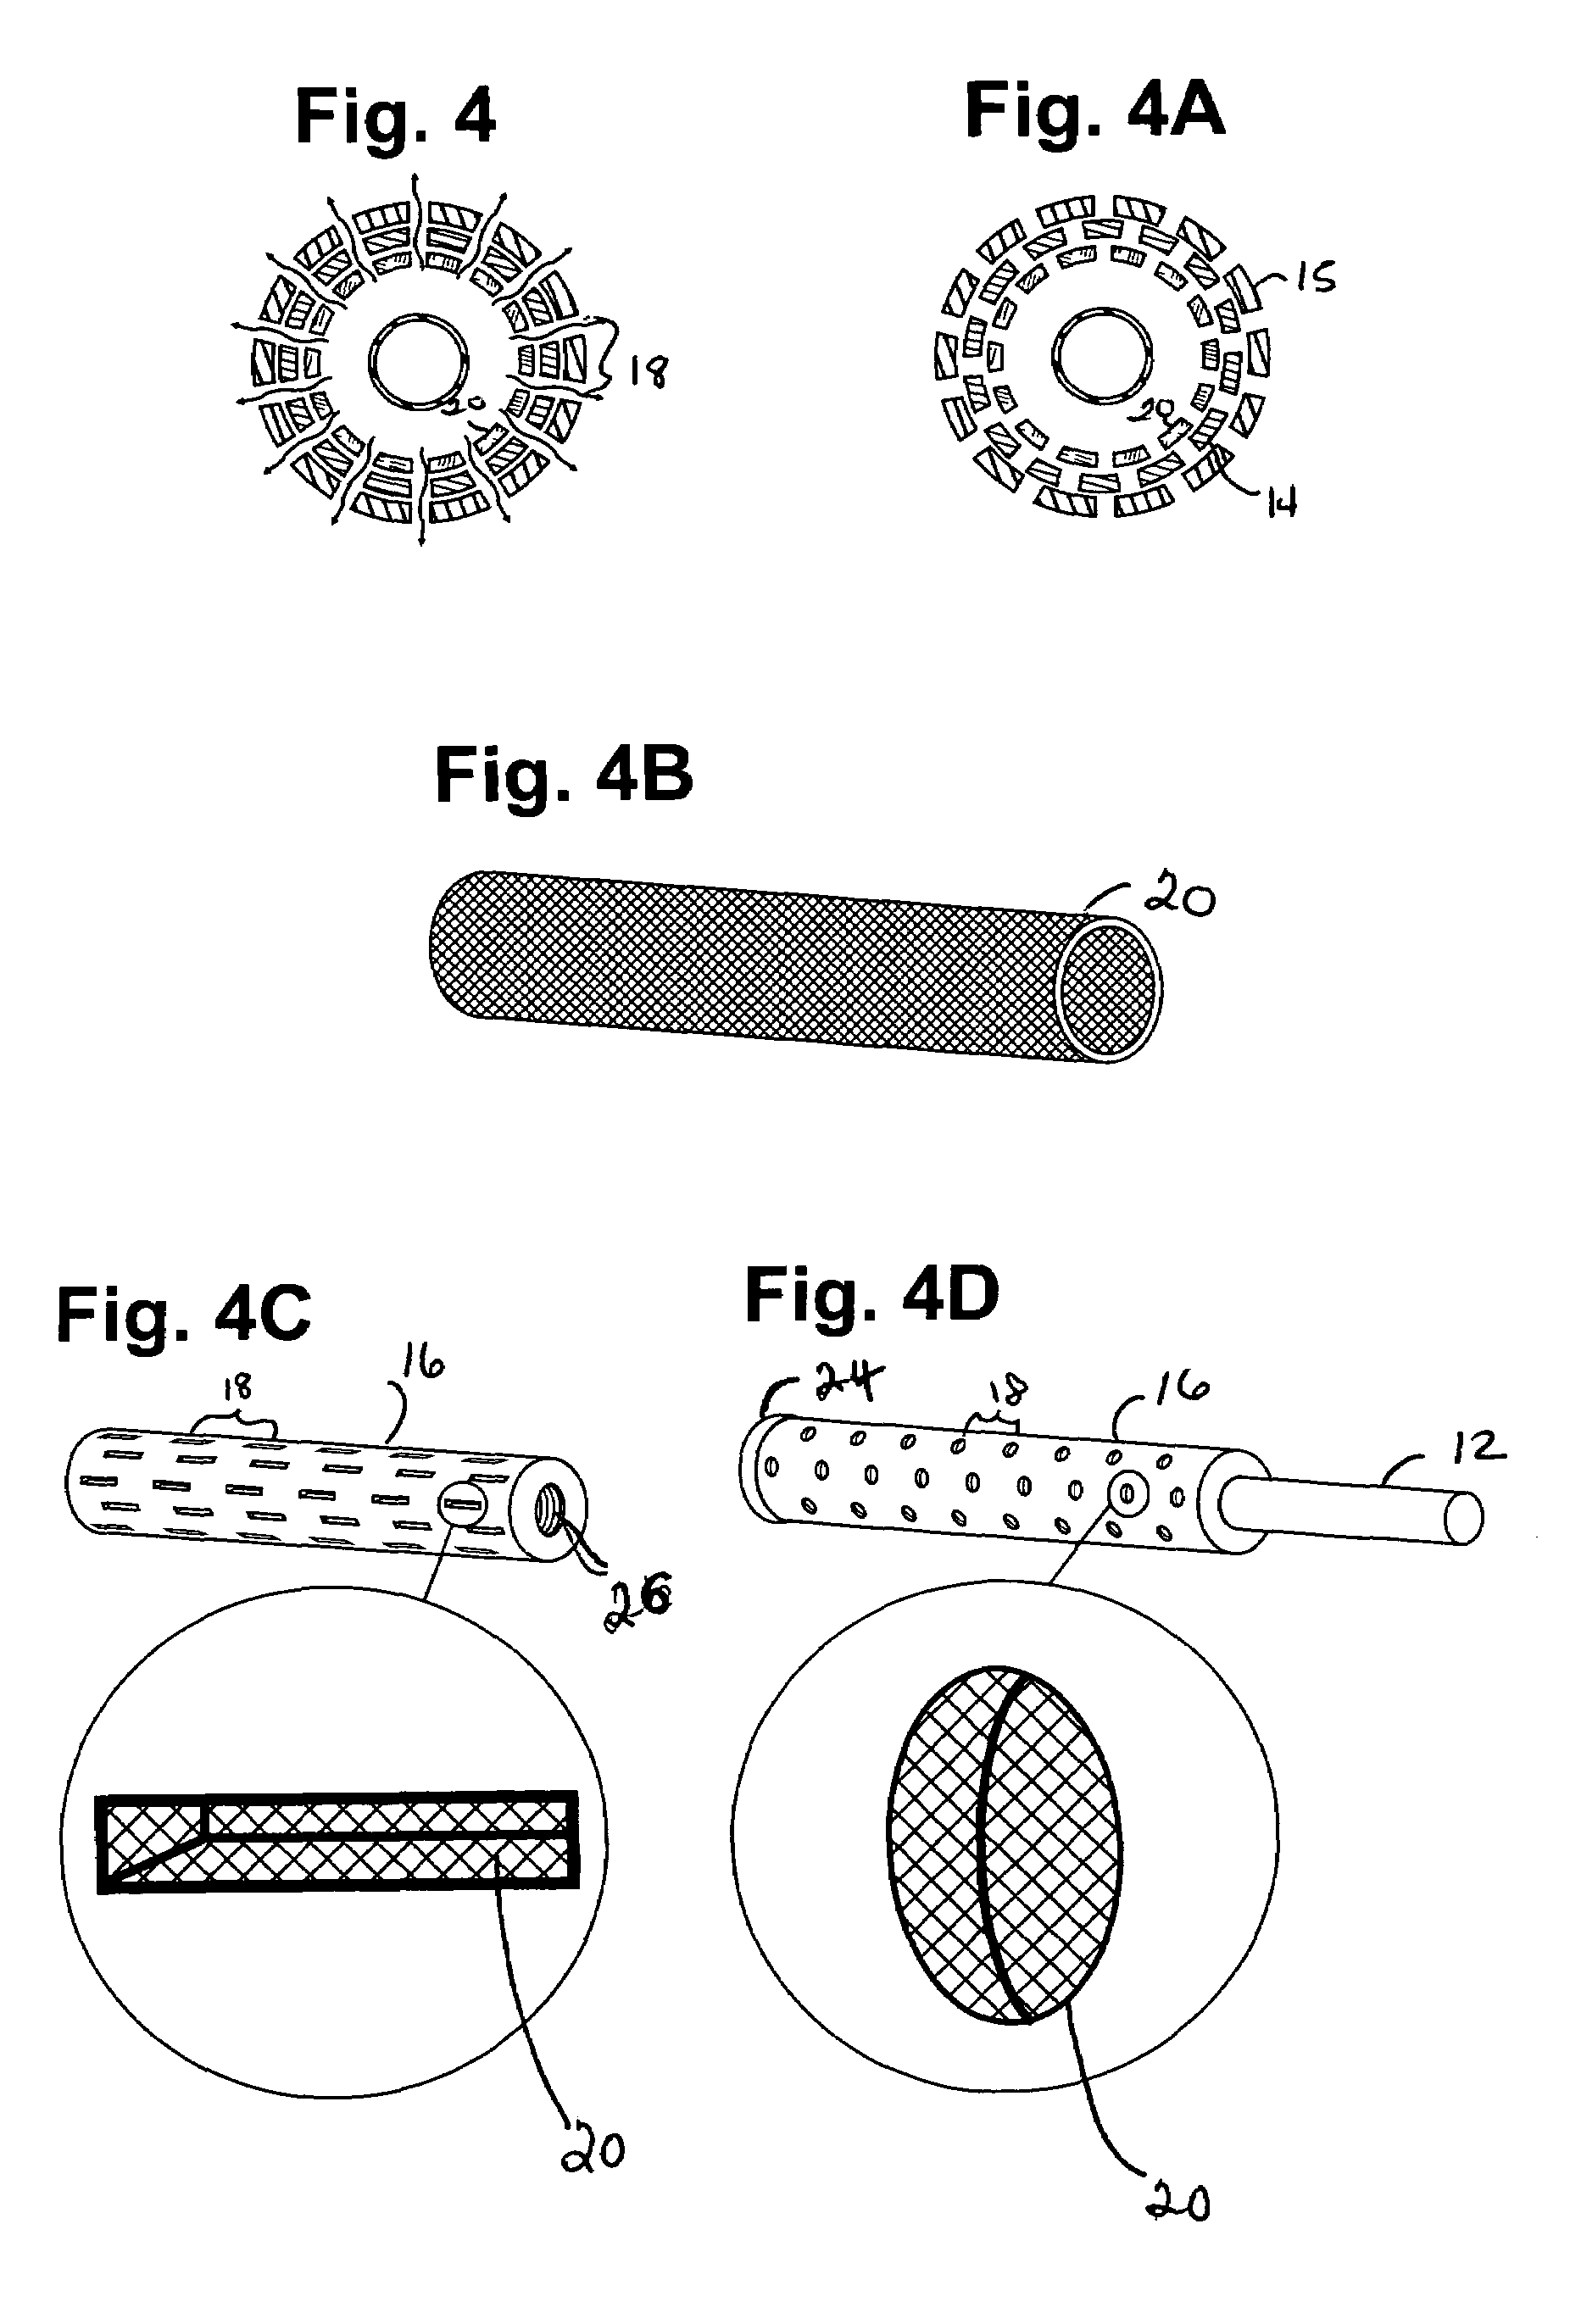 Surface treatment articles and methods